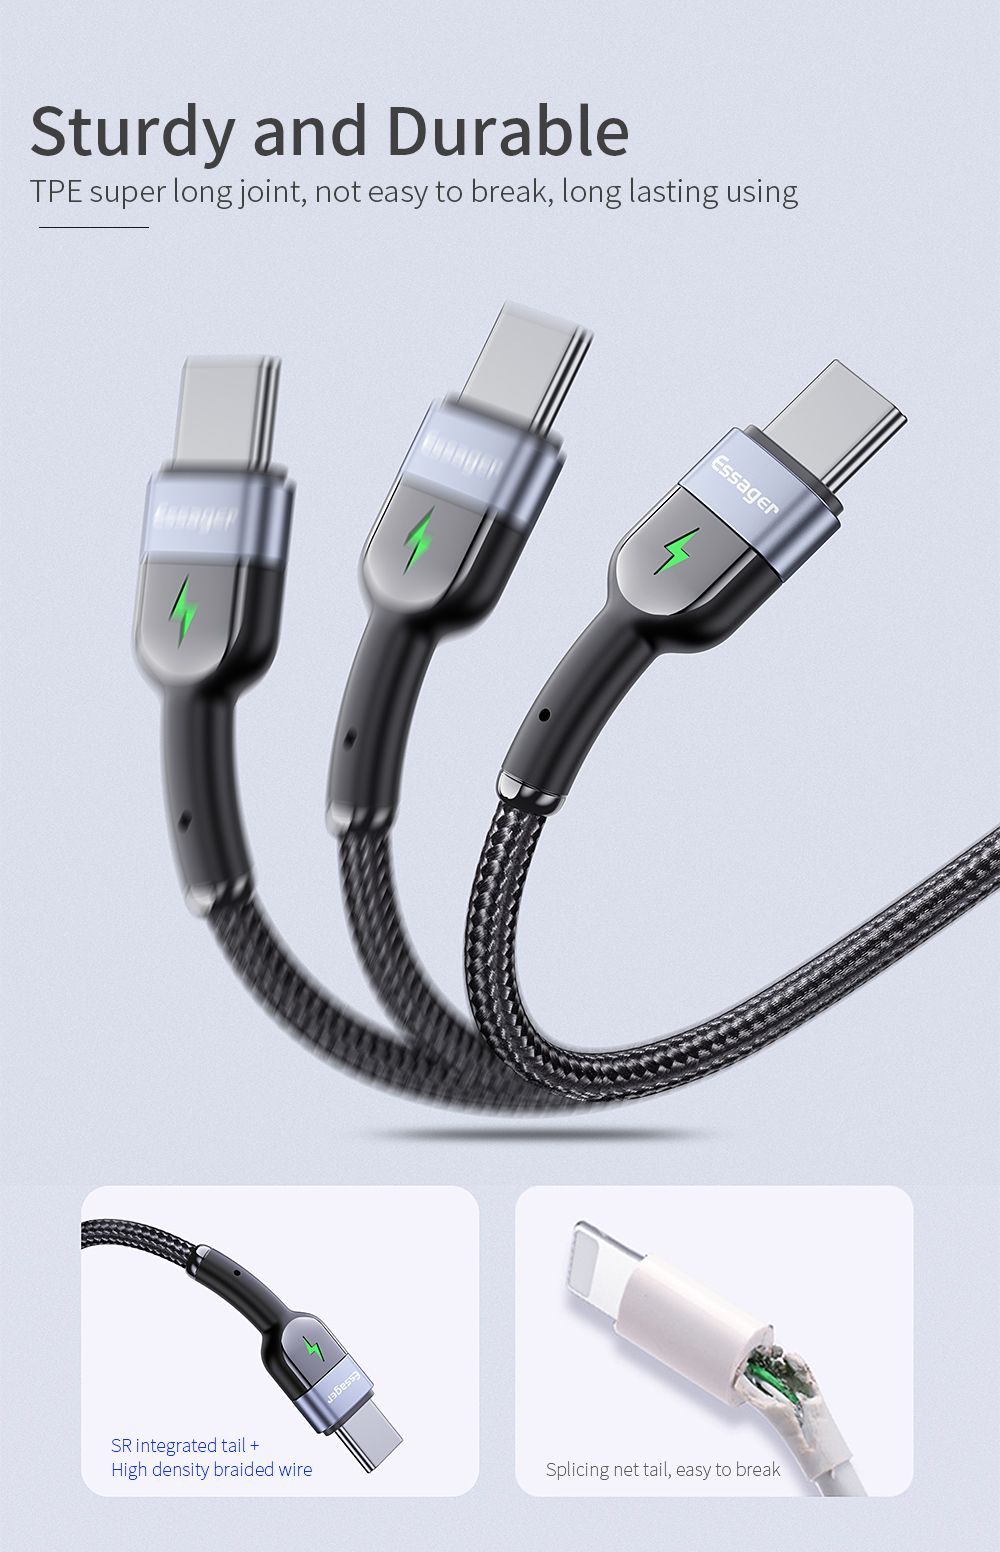 Essager-LED-USB-Type-C-Cable-3A-Fast-Charging-Data-Cable-for-Samsung-S20-Mi-10-POCO-X3-NFC-Huawei-1746930